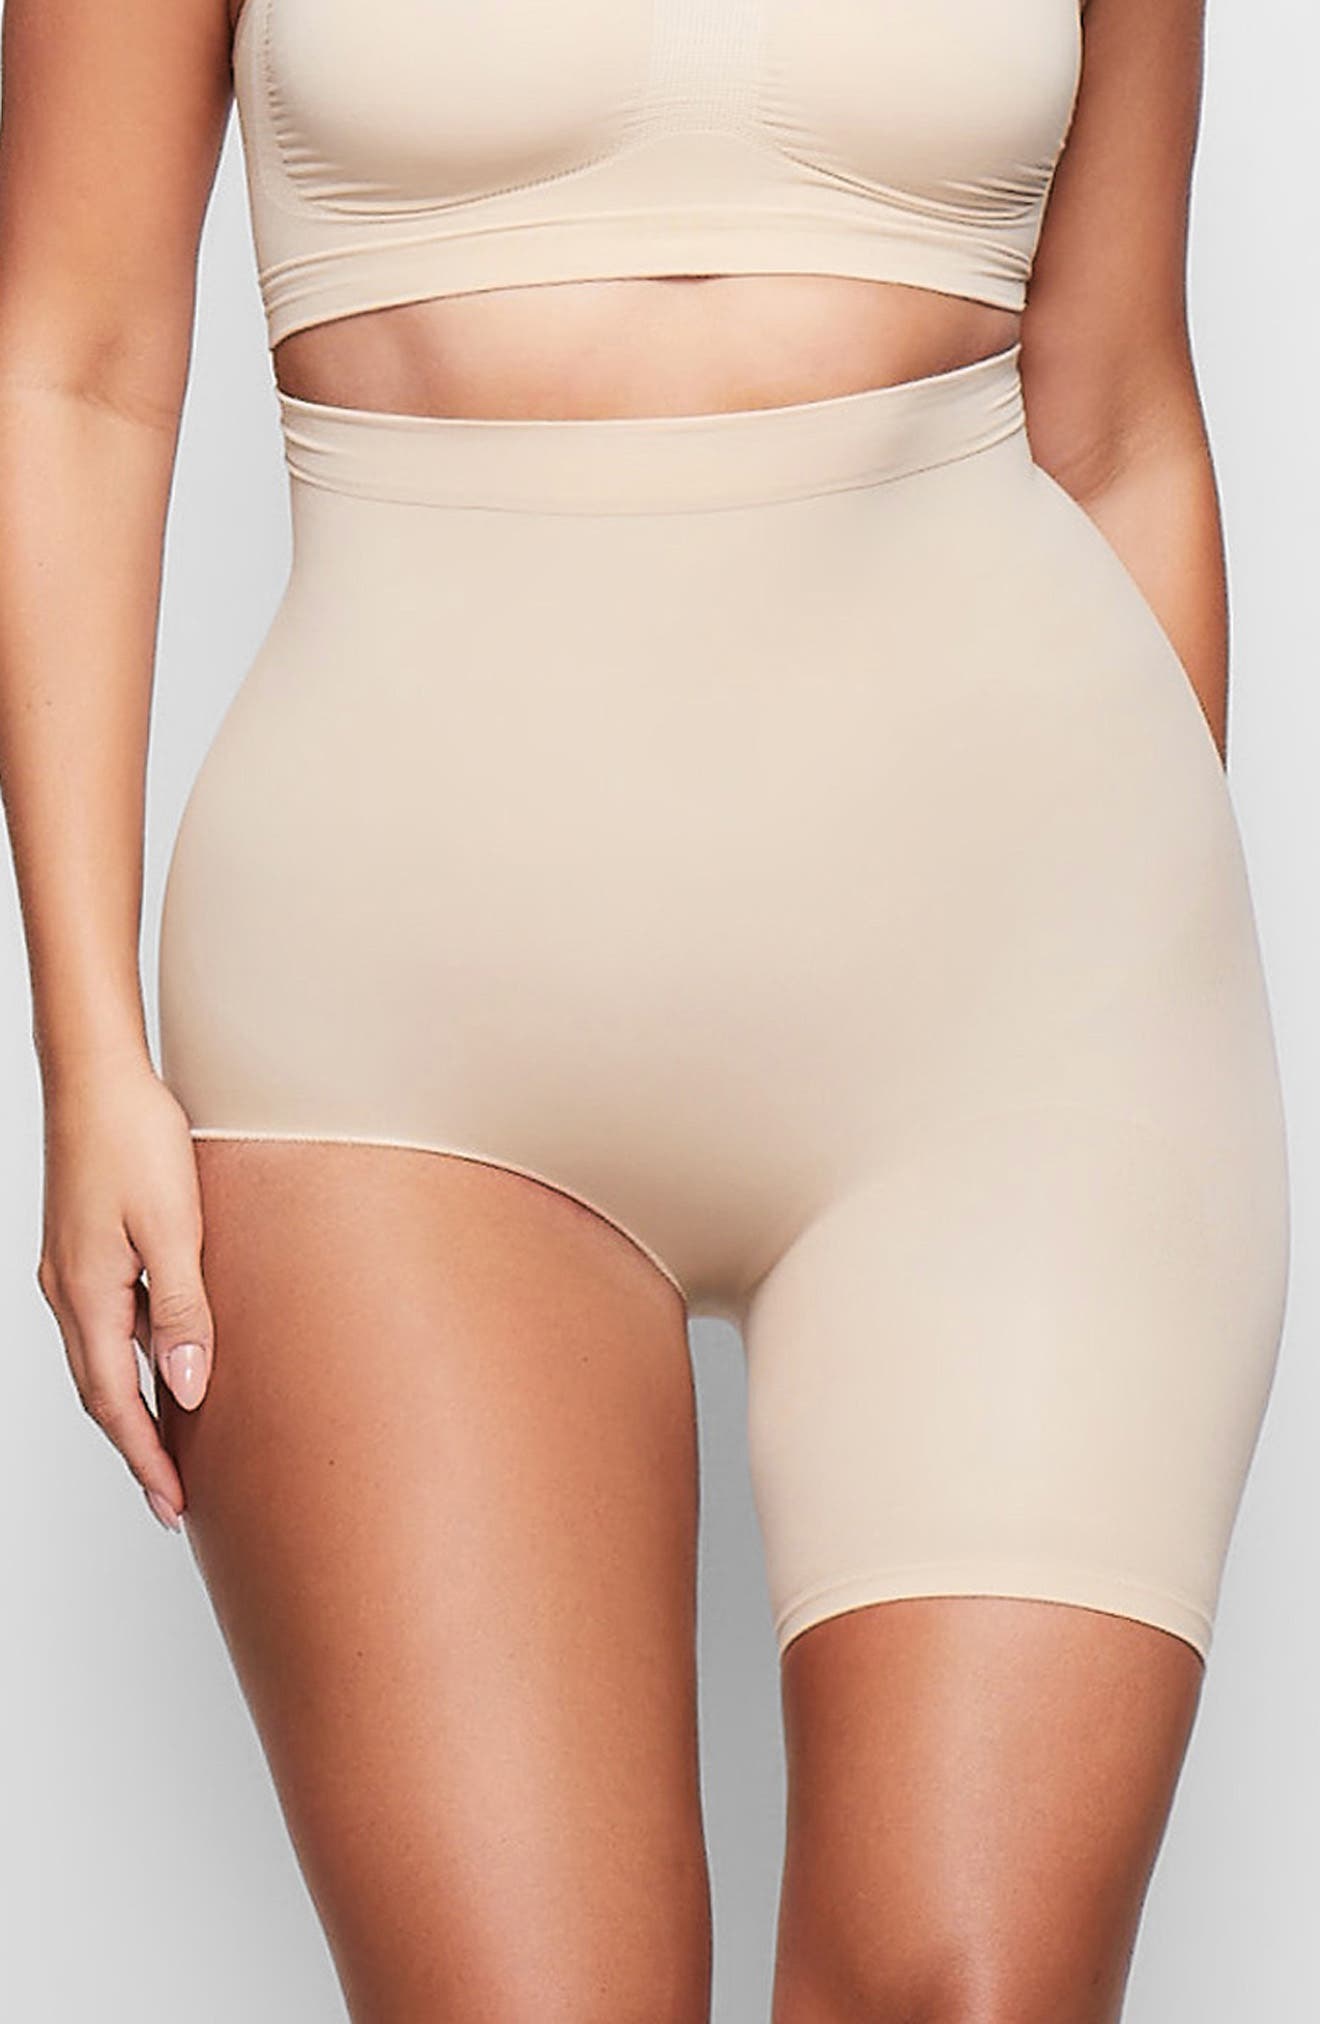 Kim Kardashian's Skims Line Is Now Available at Nordstrom